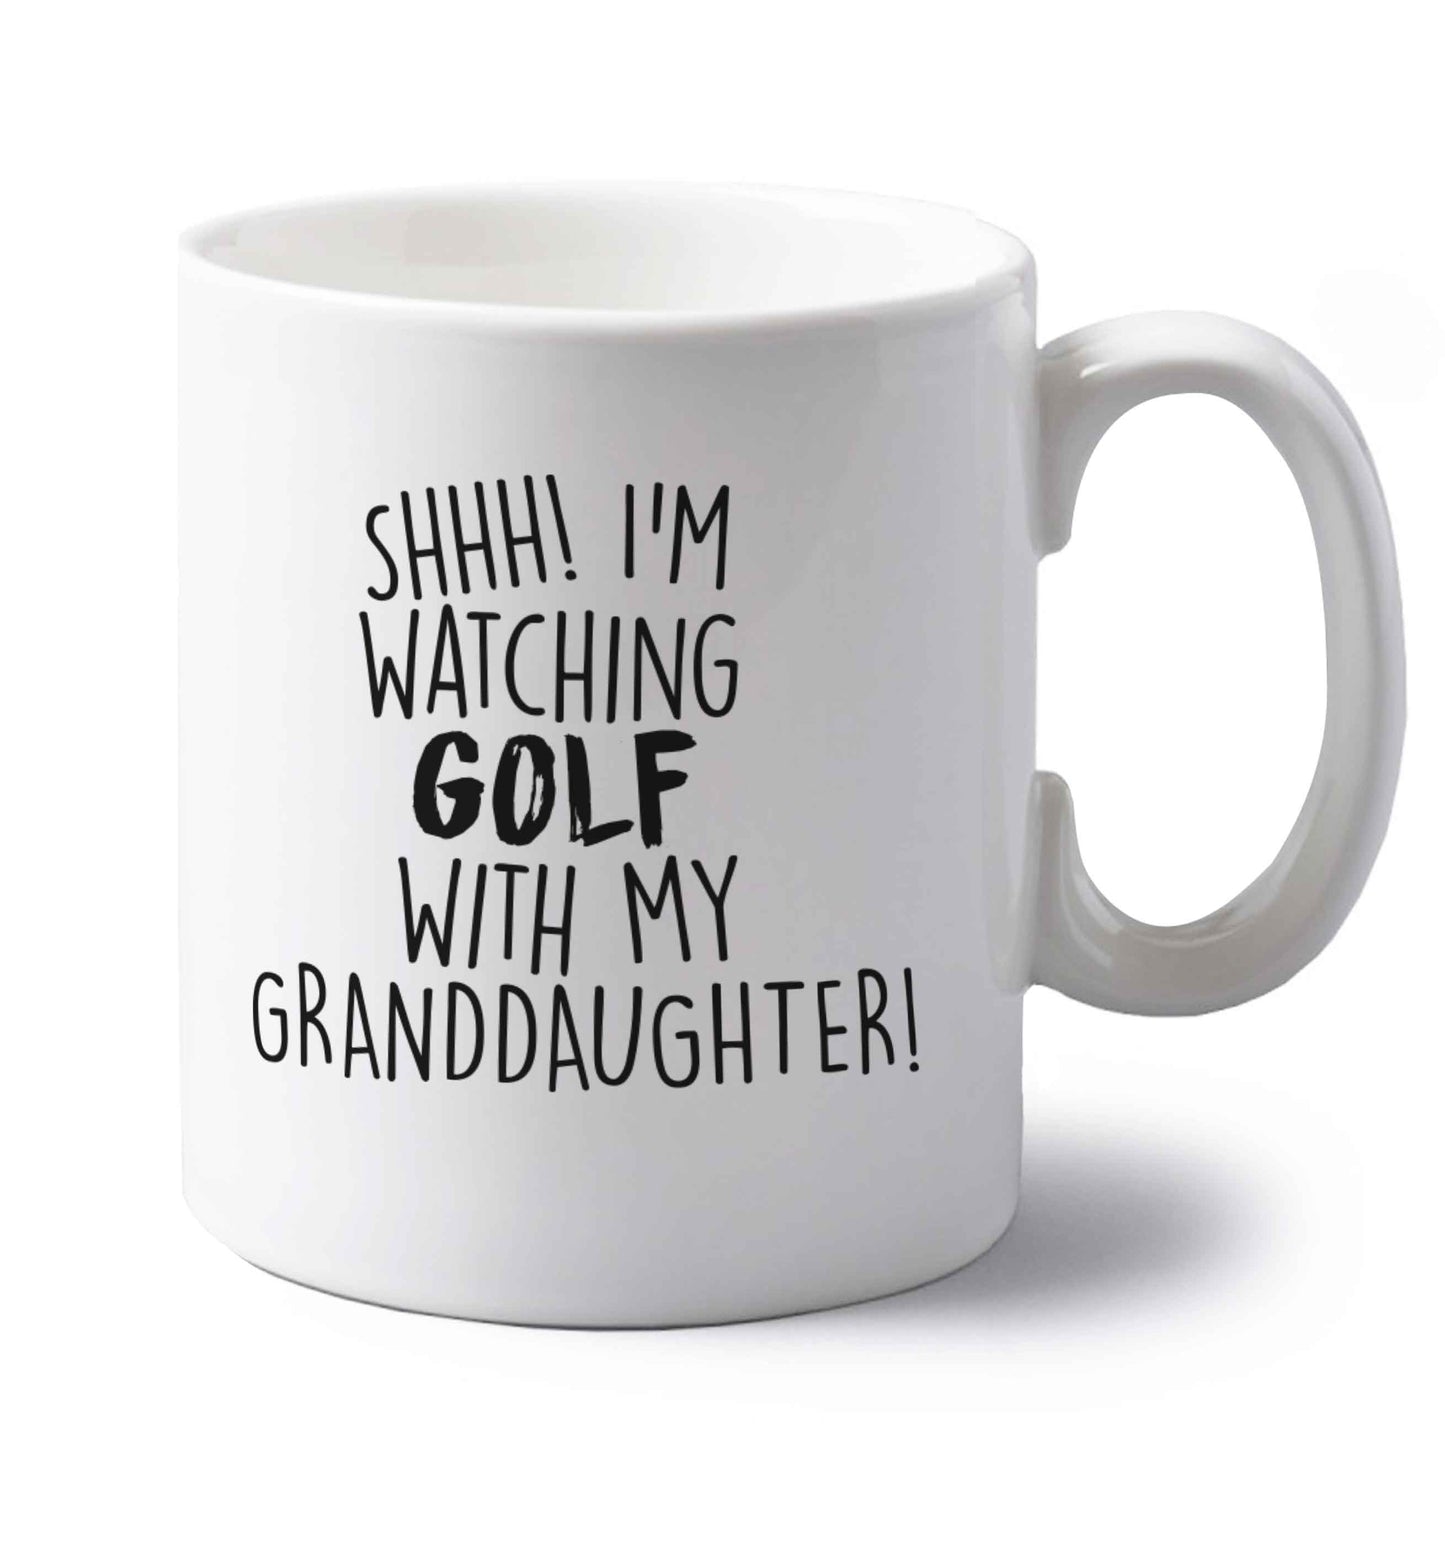 Shh I'm watching golf with my granddaughter left handed white ceramic mug 